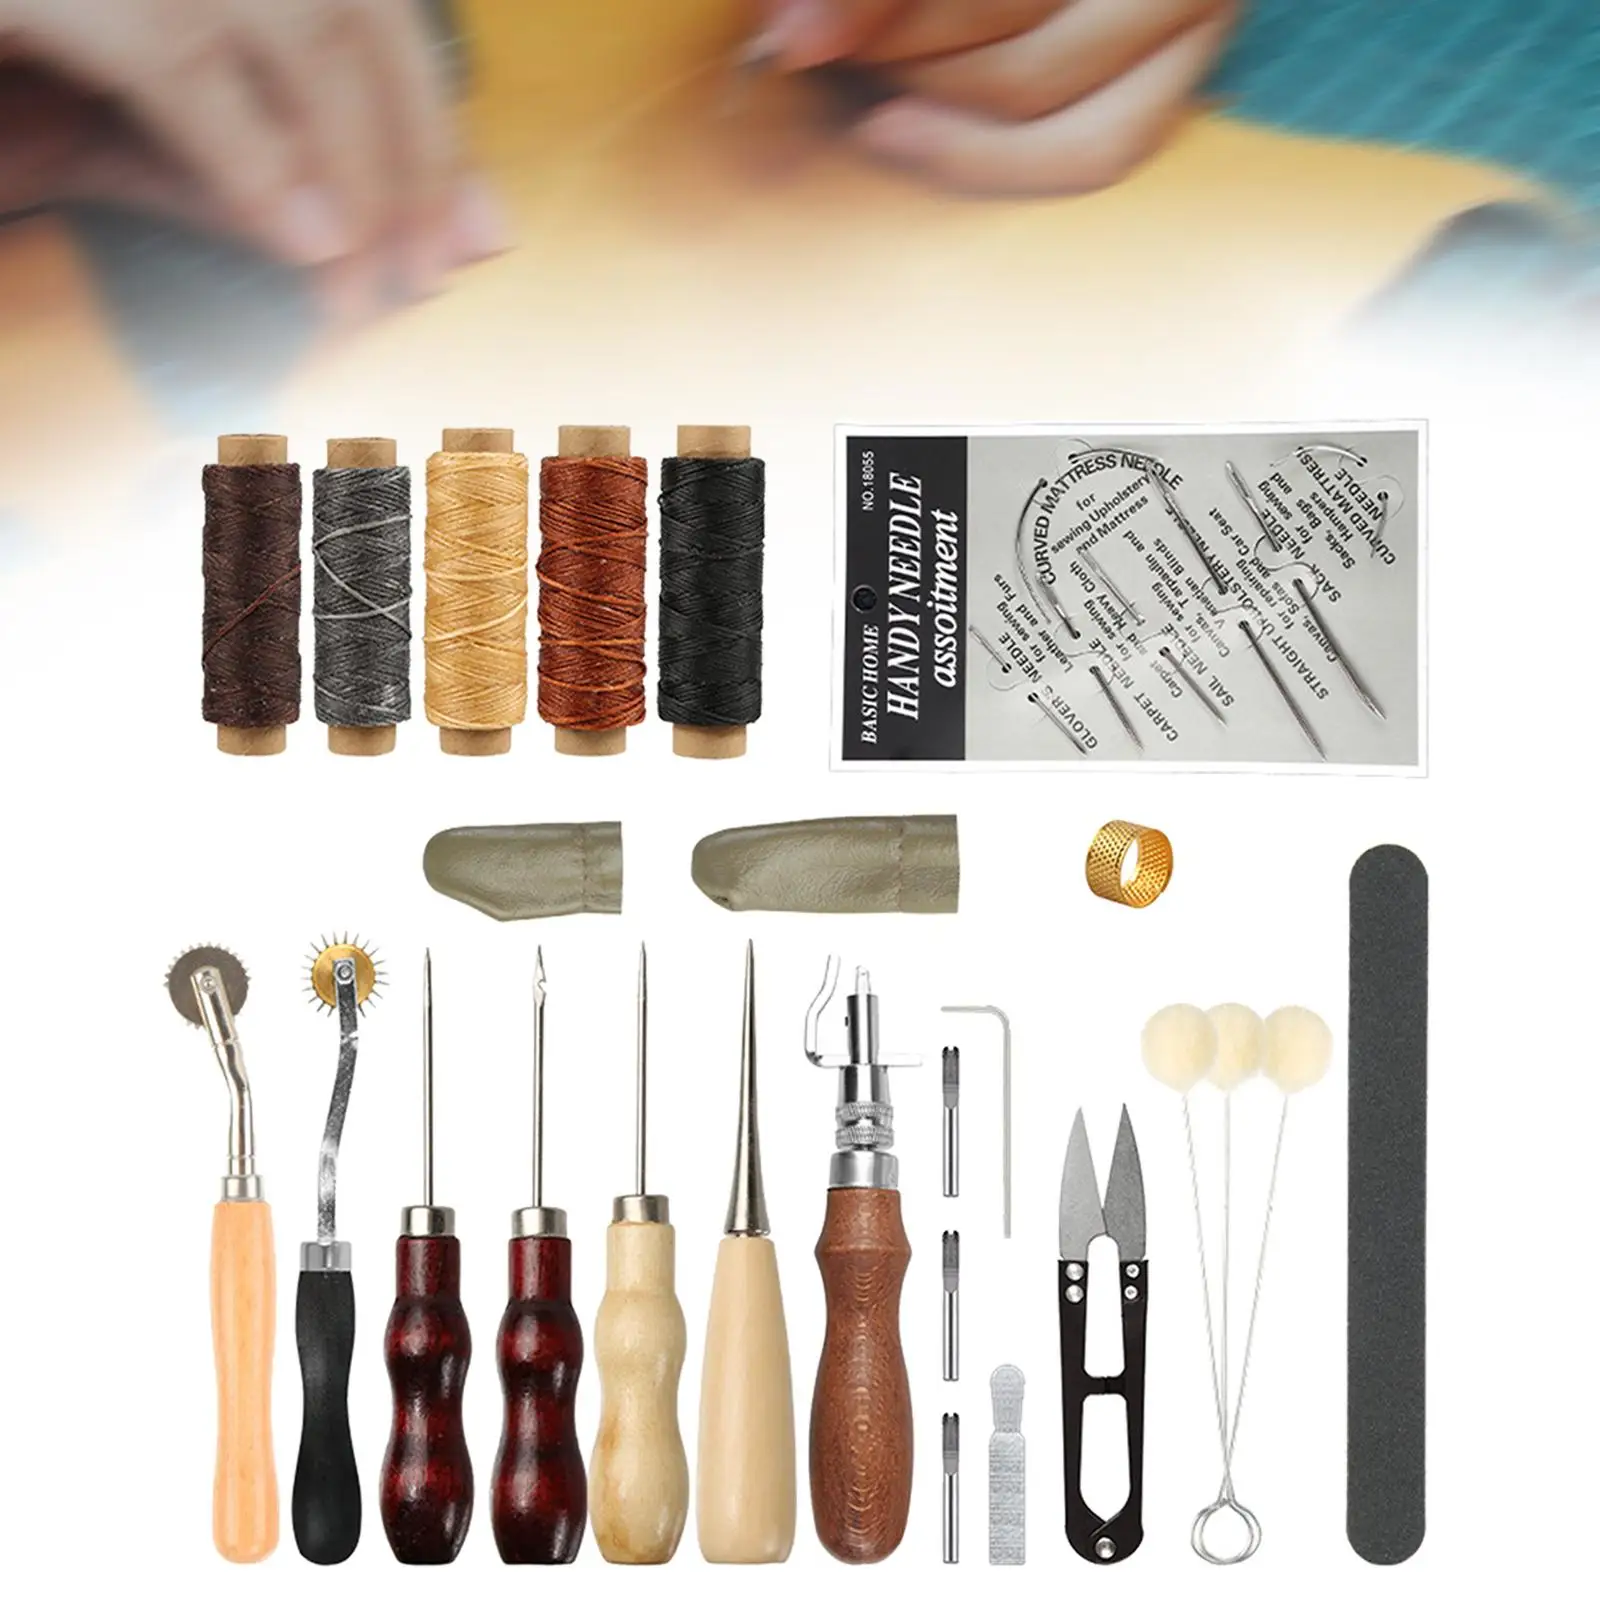 Leather Working Tools Set with Waxed Thread, Thimble, Awl Practical Leather Crafting Tools and Supplies for Leather Craft Making